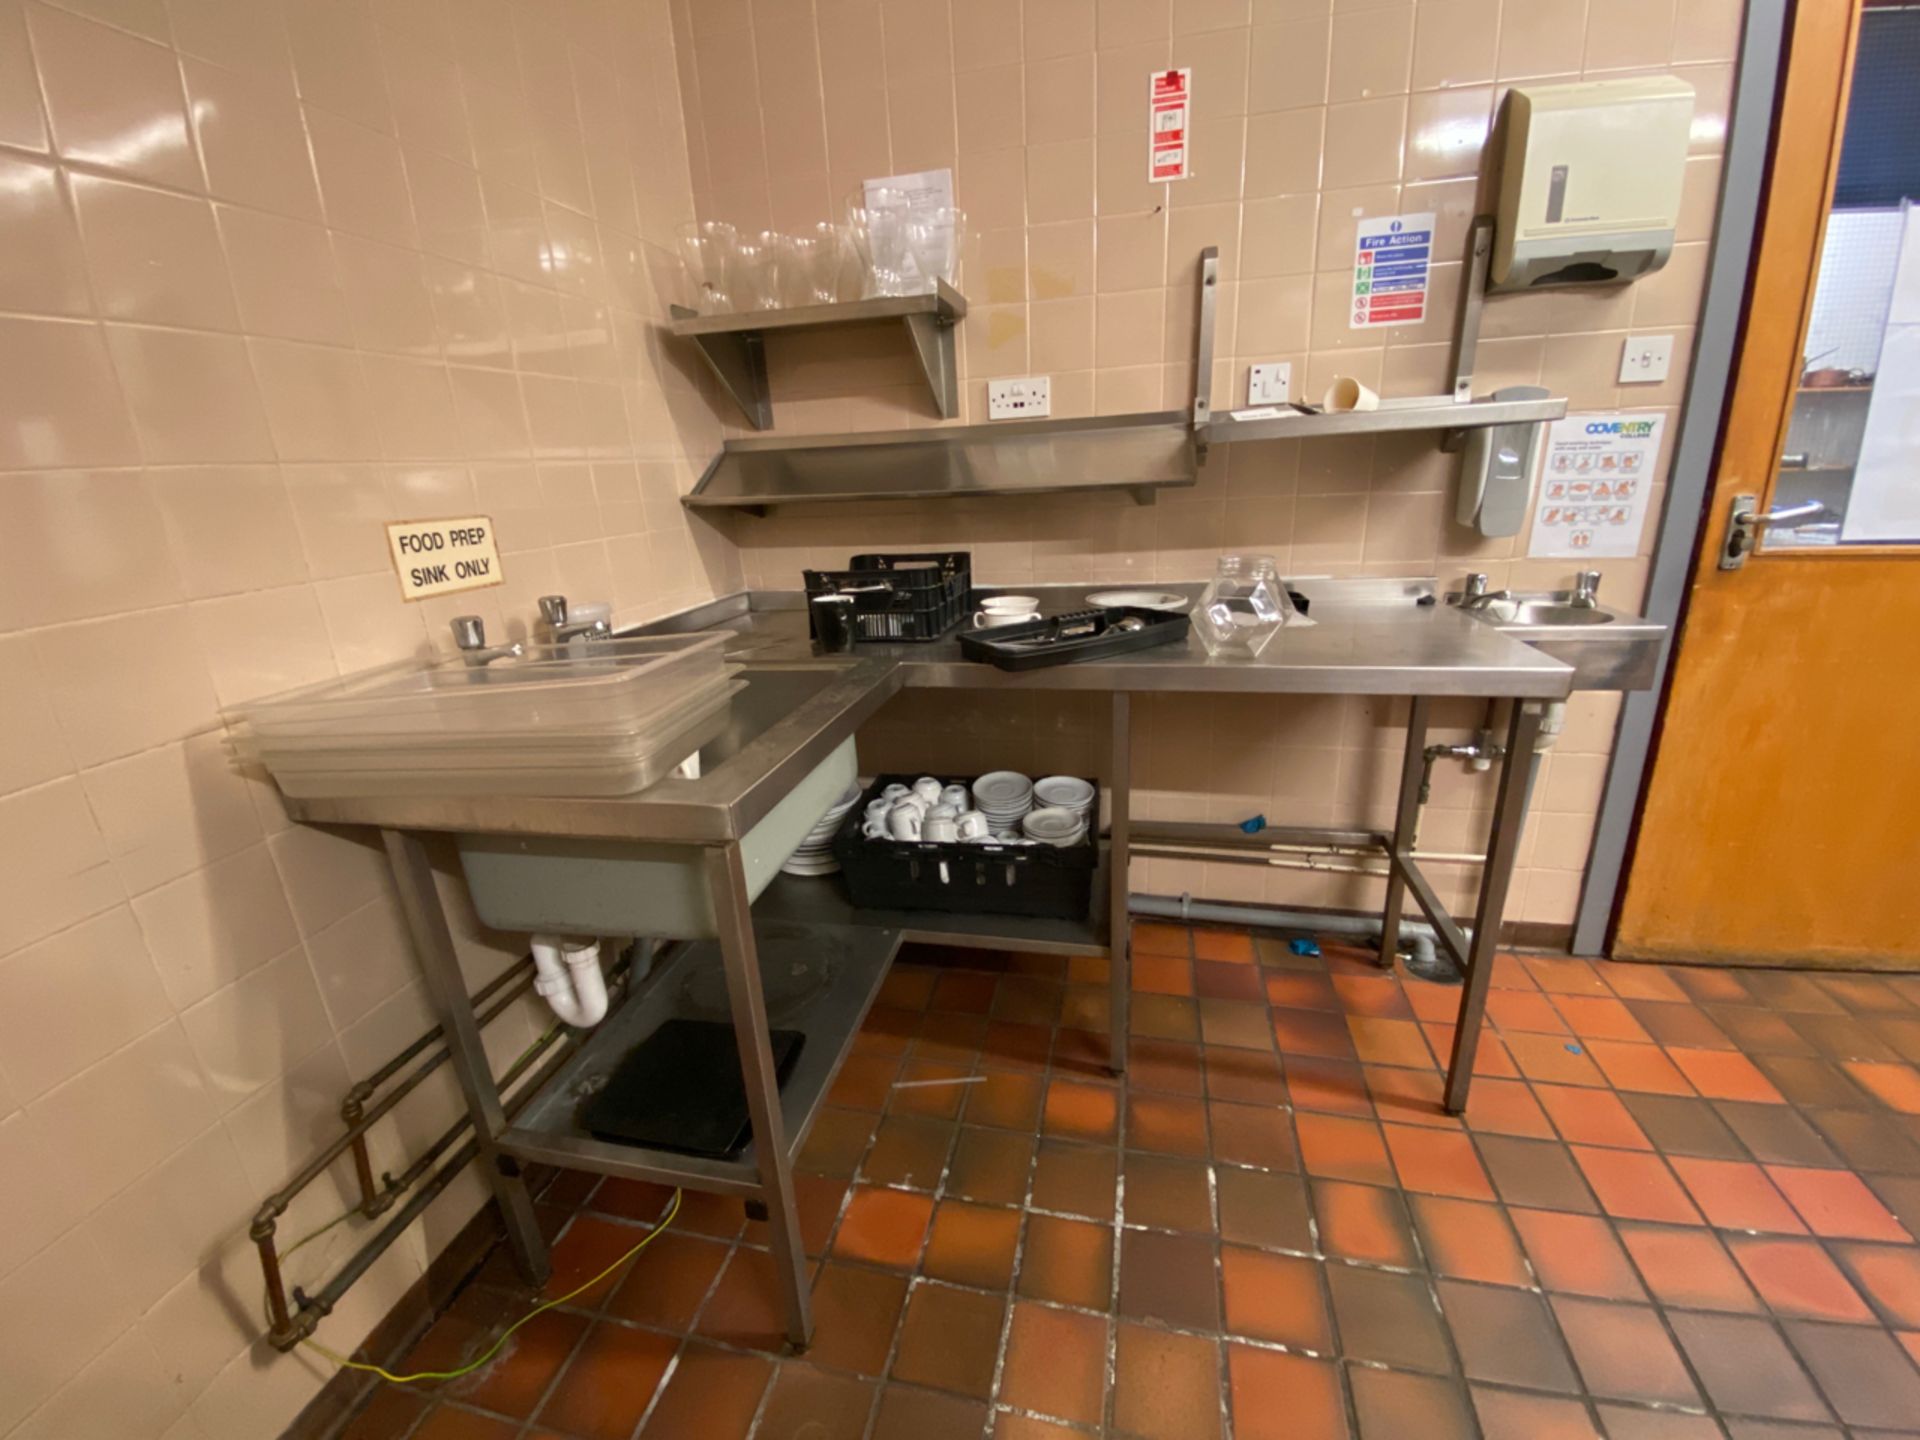 Stainless Steel Sink Unit With Wall Shelving & Sink Includes Items Shown On Image